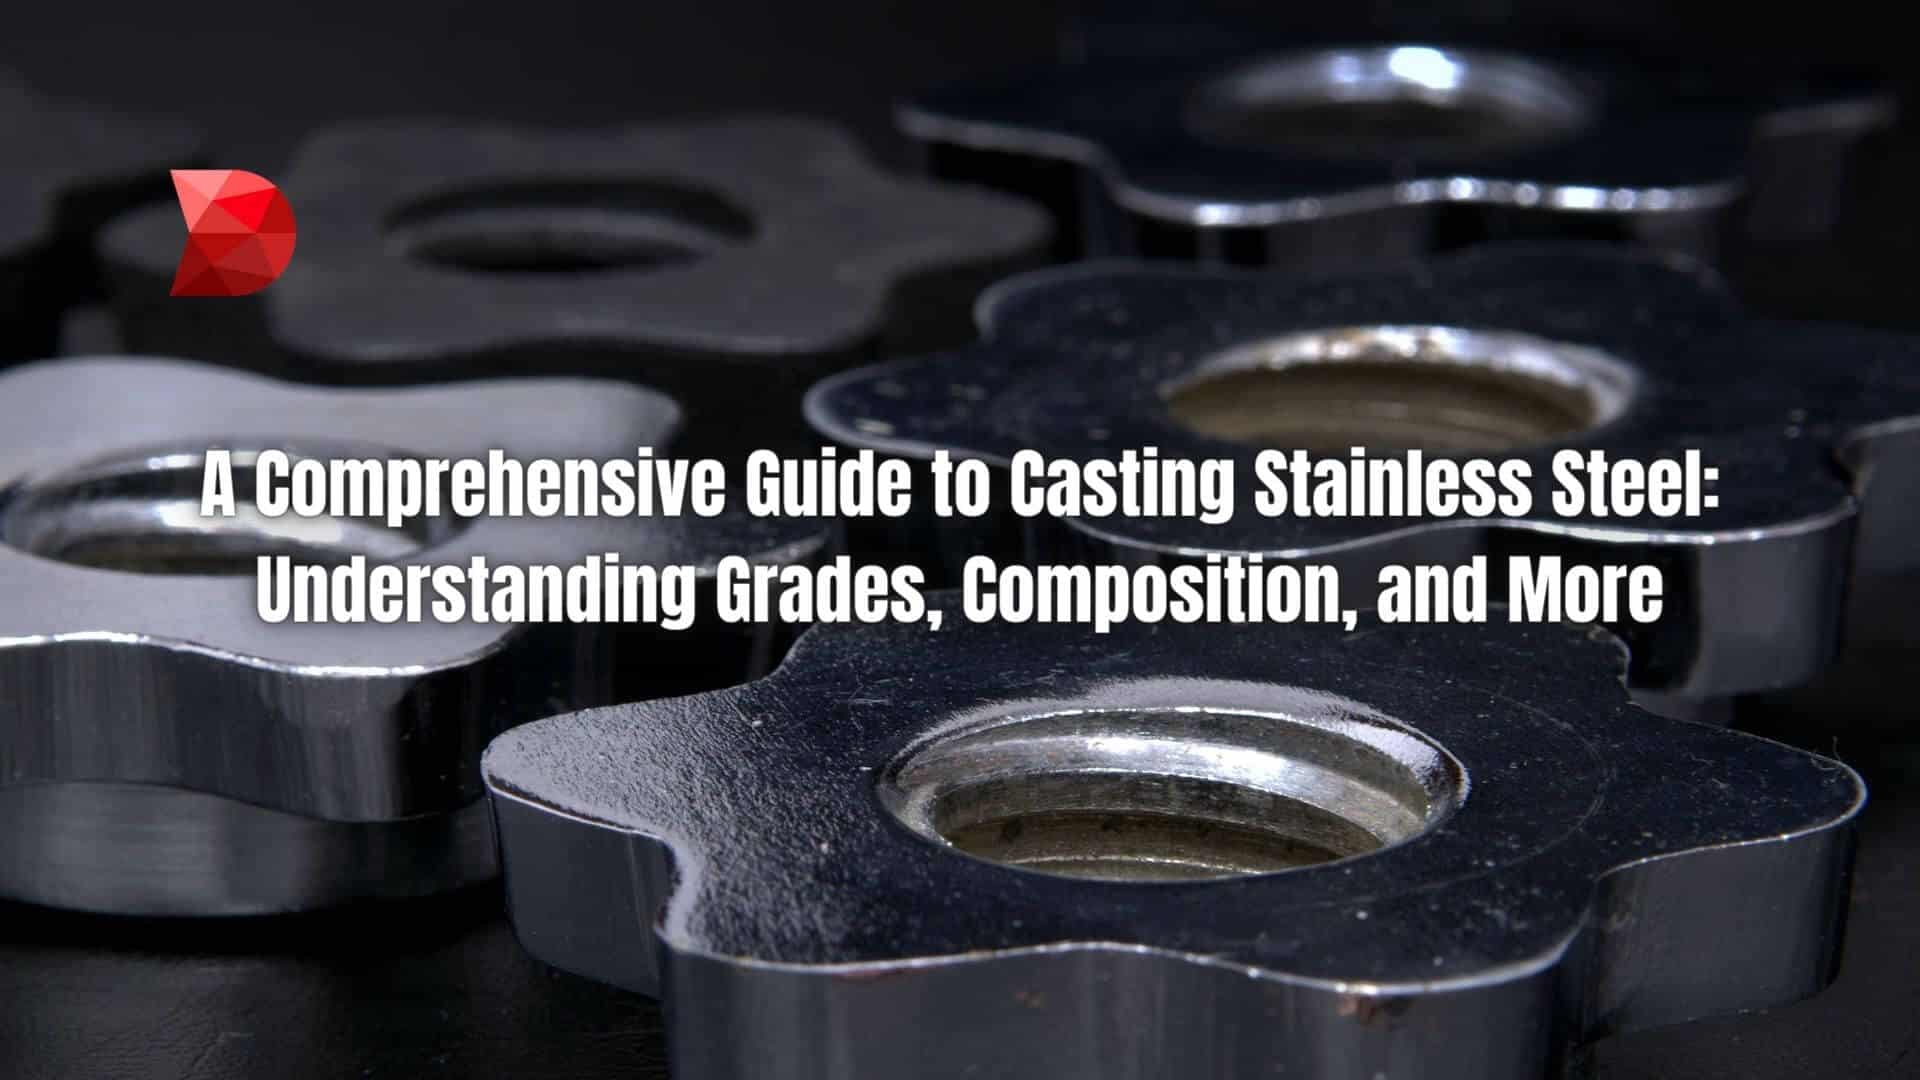 Unlock the secrets to successful stainless steel casting! Click here to learn the process, techniques, and best practices in this guide.